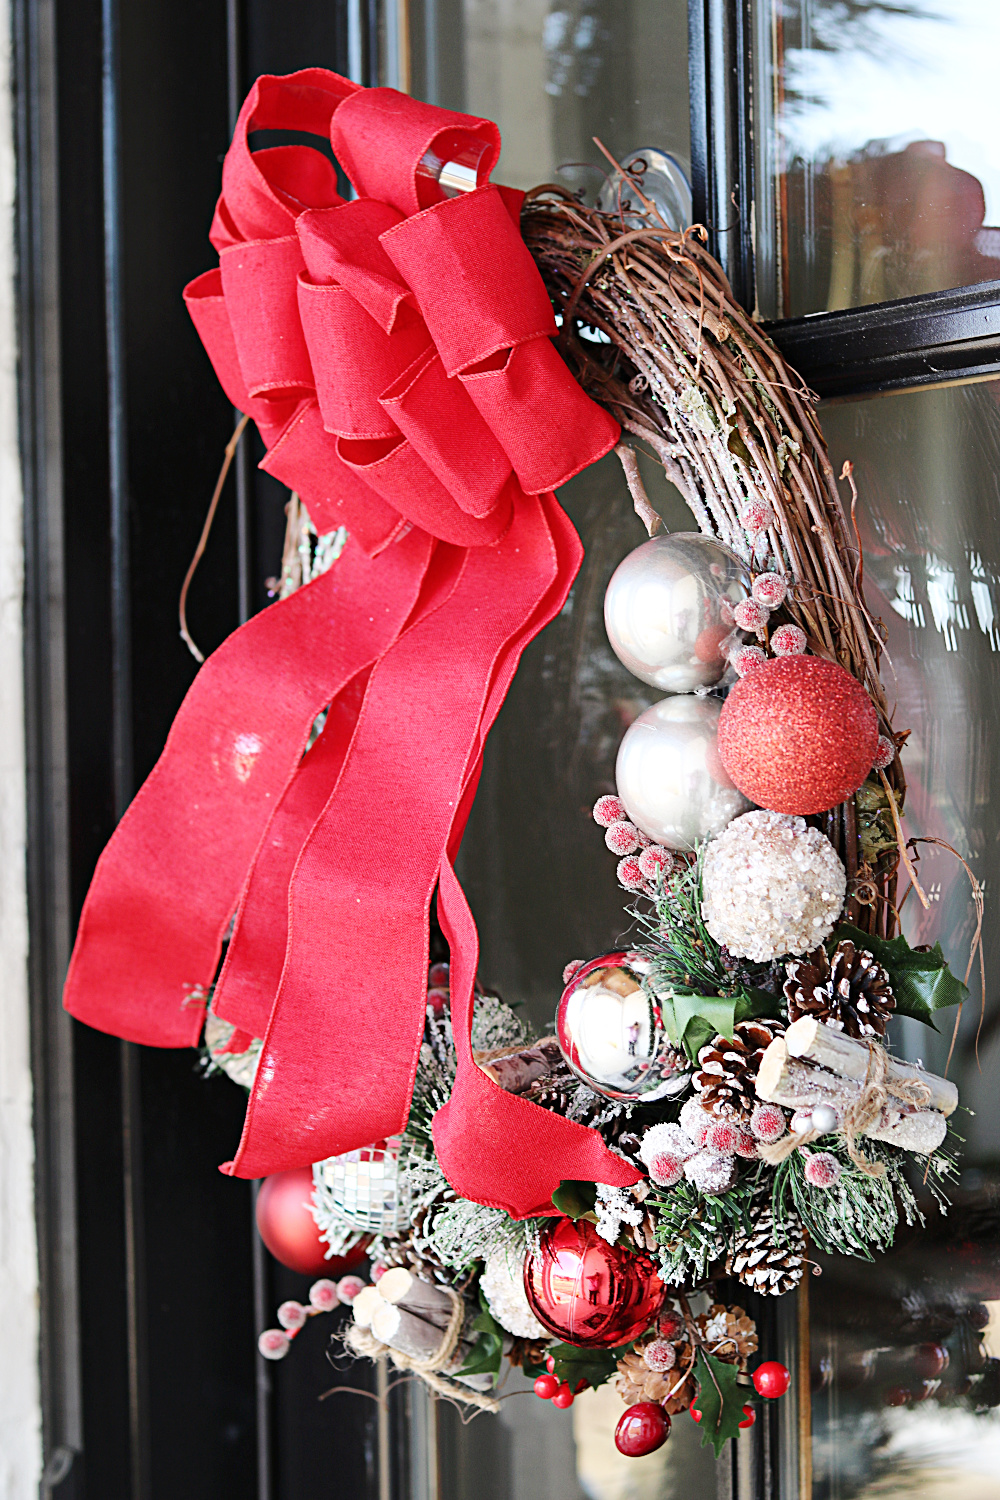 glitter-adhesive-frosted-wreath-diy-grapevine